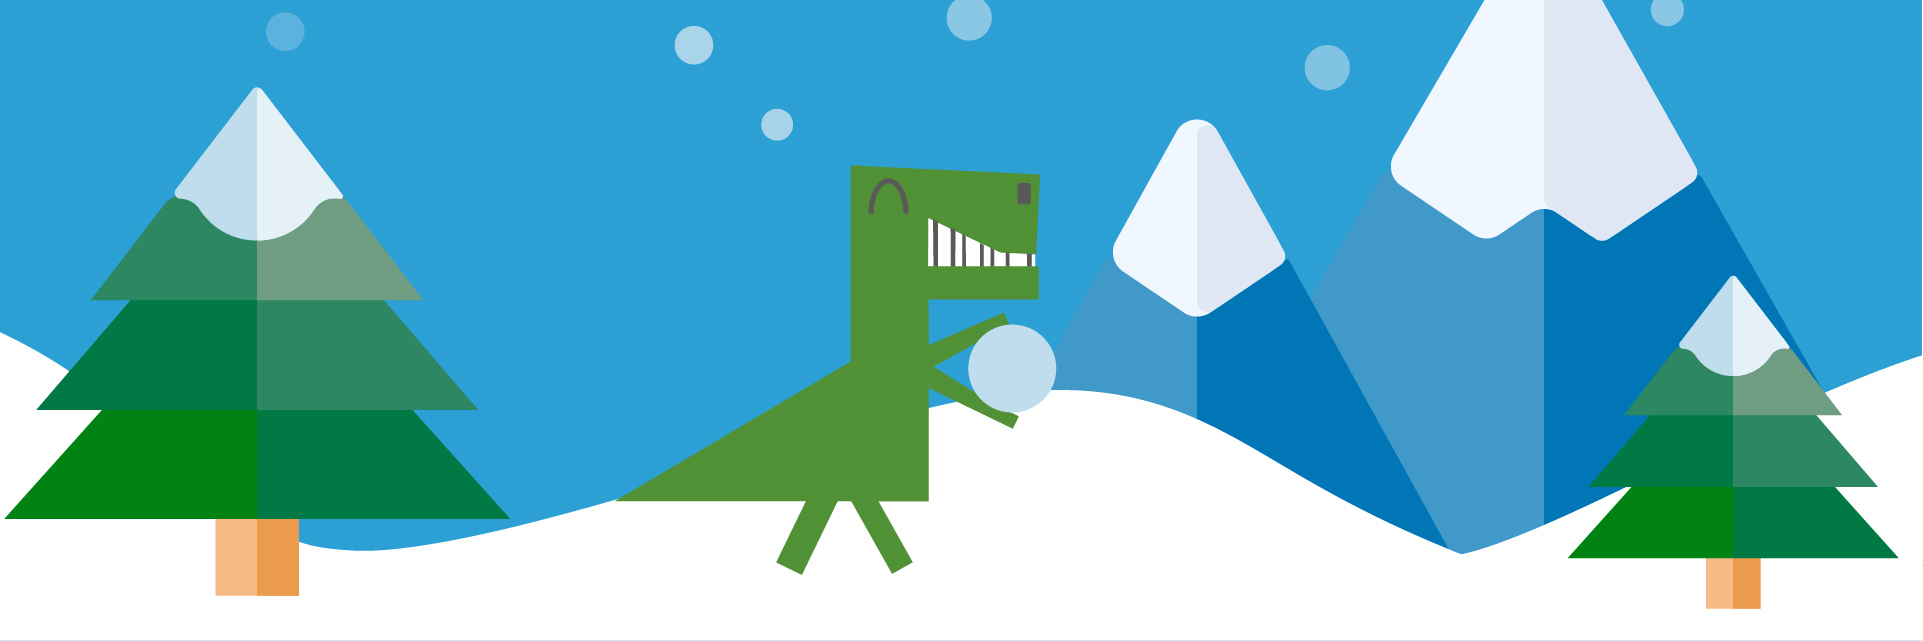 A cartoon image of the Code Playground dinosaur in a wintery snowscape holding a very large snowball.